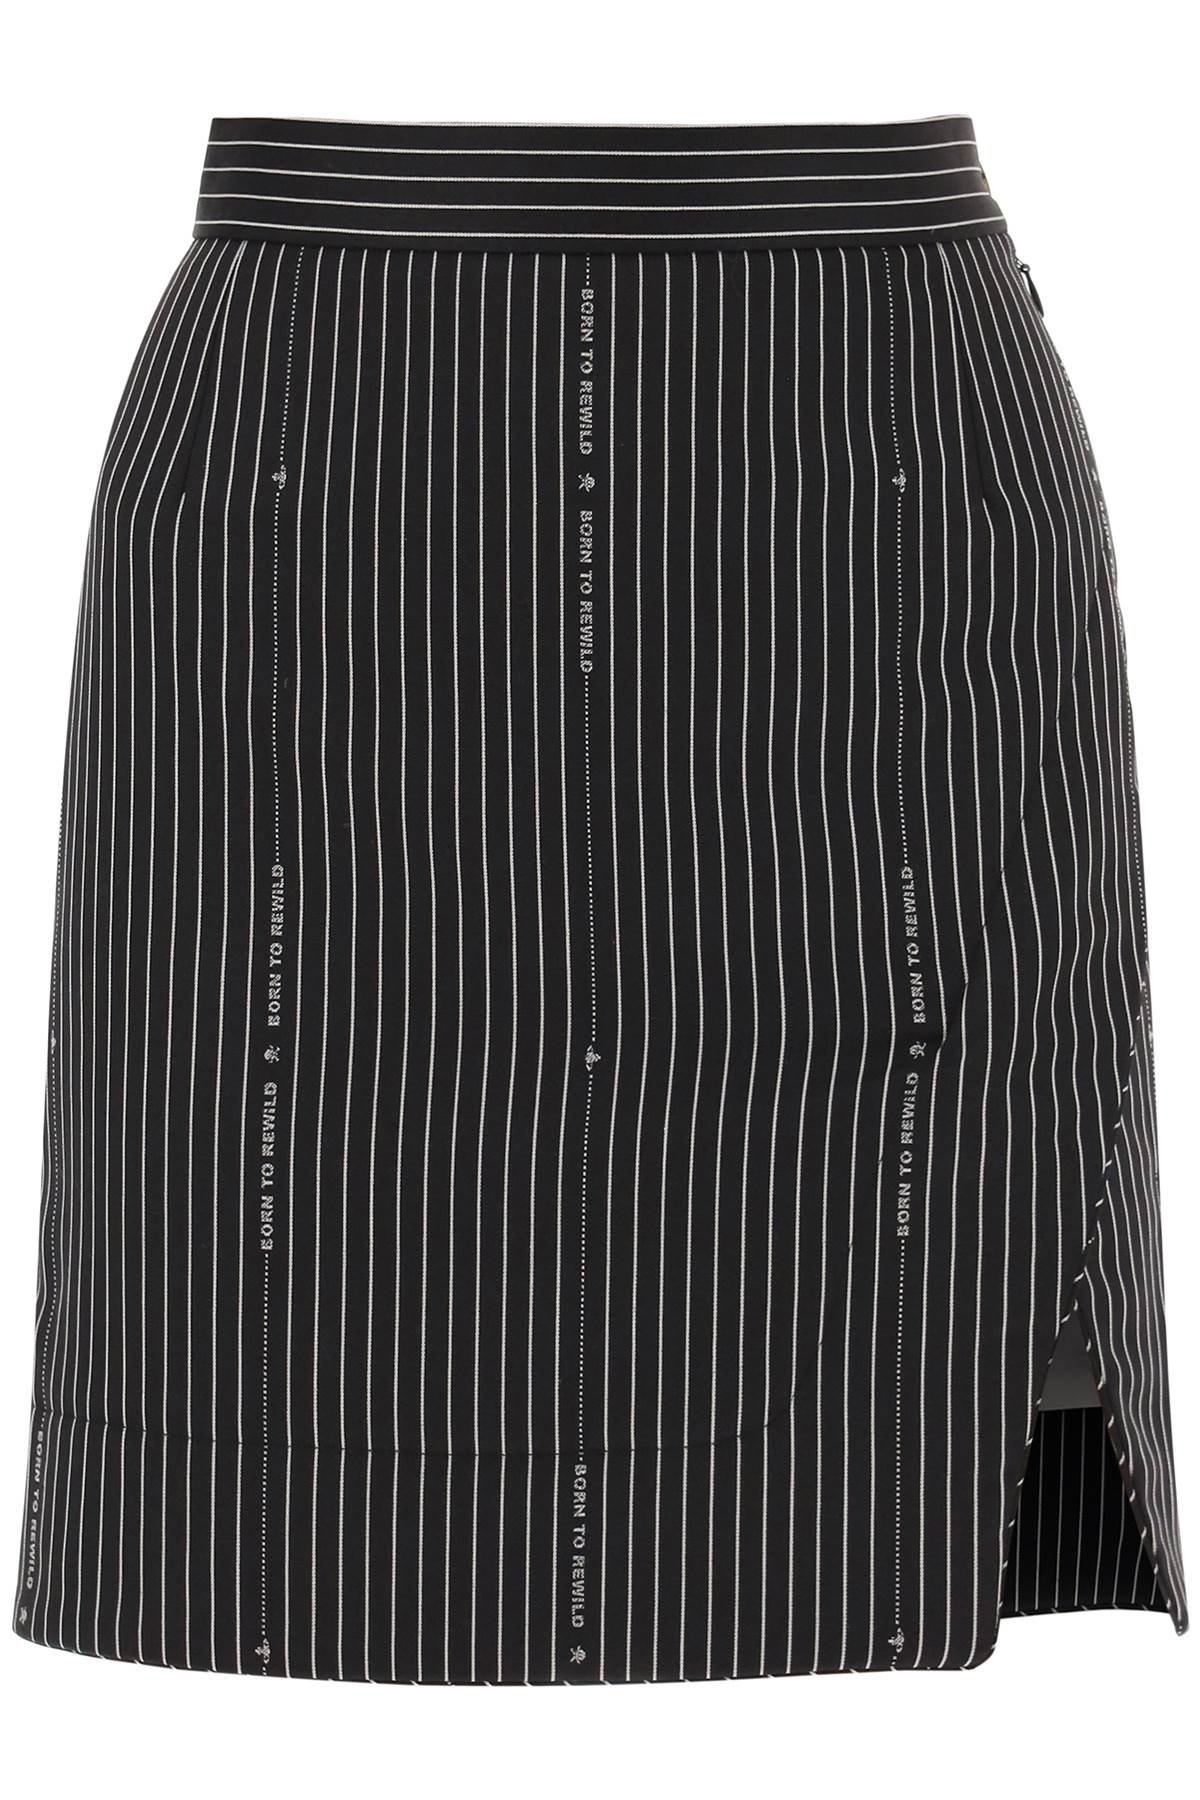 VIVIENNE WESTWOOD Black Pinstriped Mini Skirt with Wrap Design and High-Rise Waist